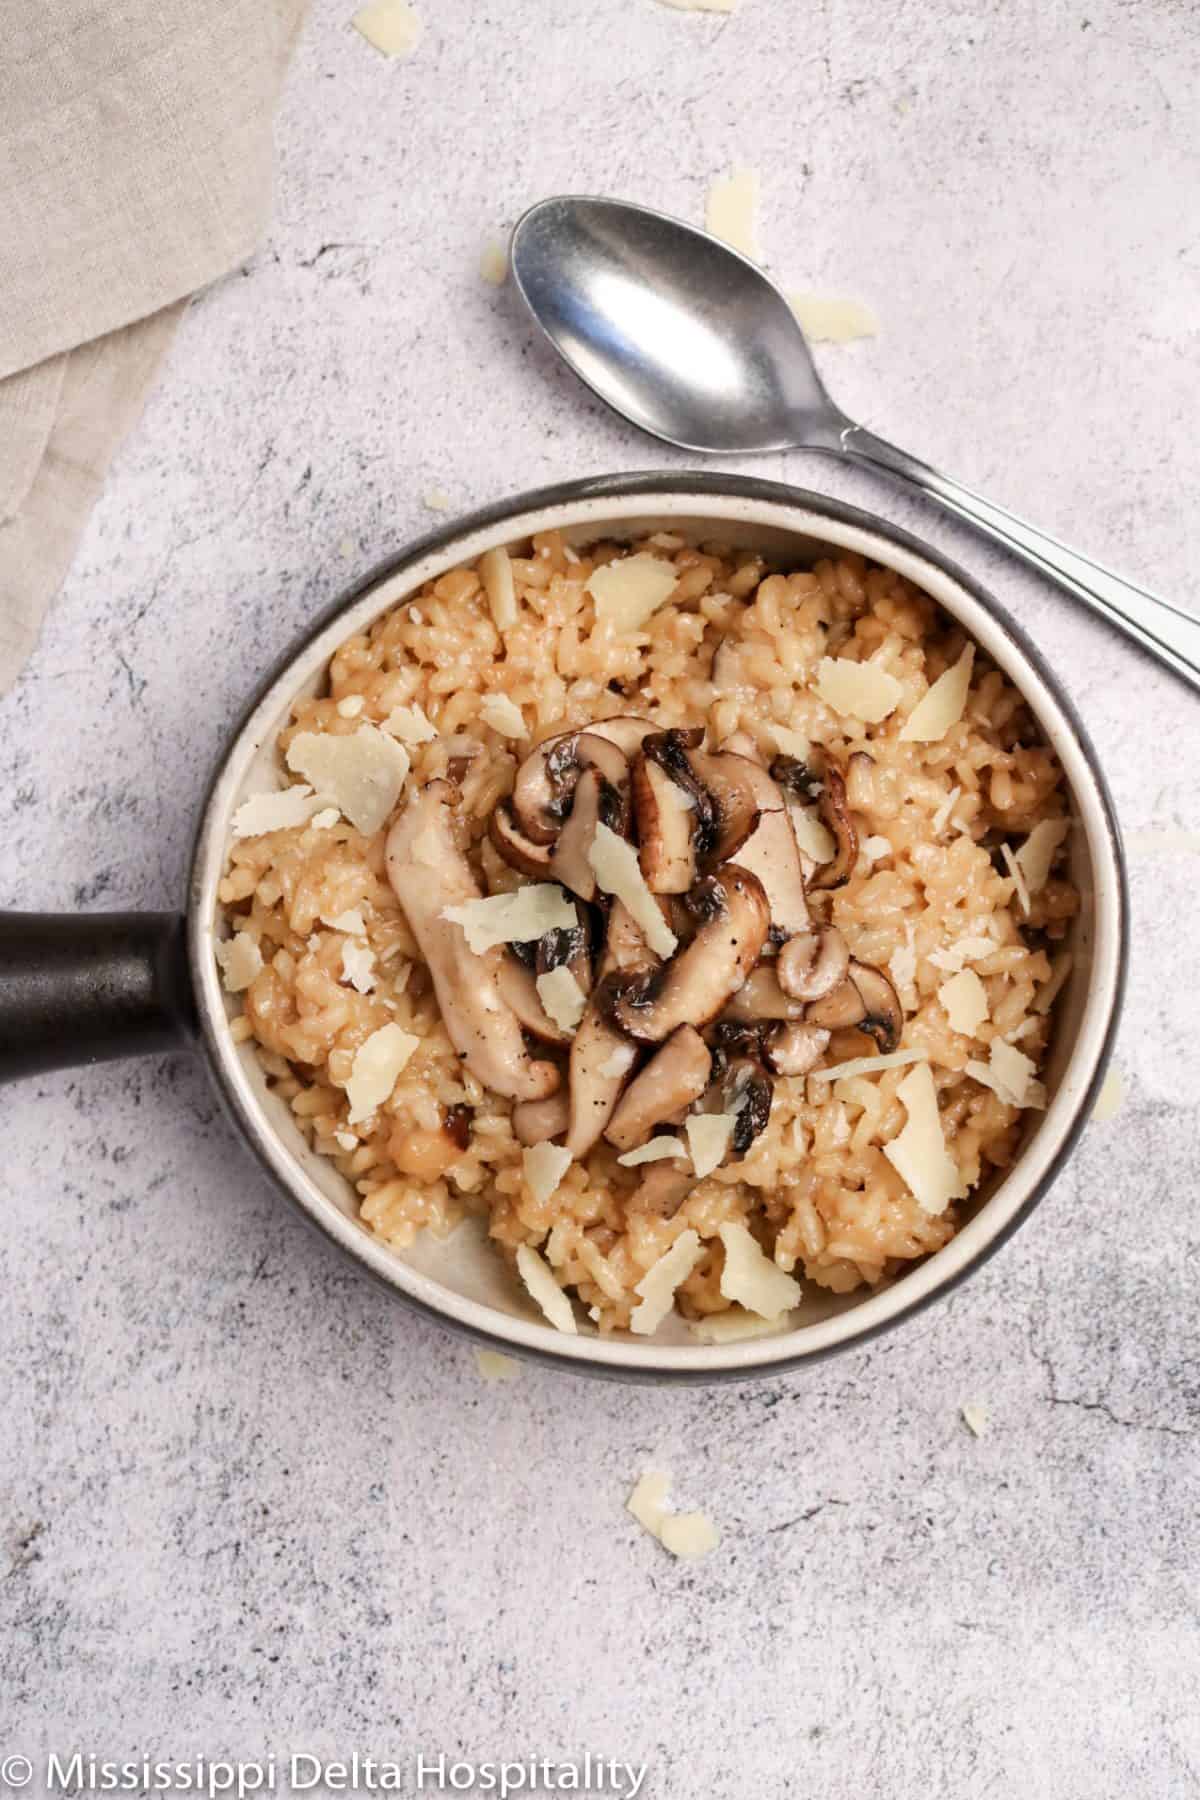 a bowl of mushroom risotto with parmesan shavings on top and a silver spoon.